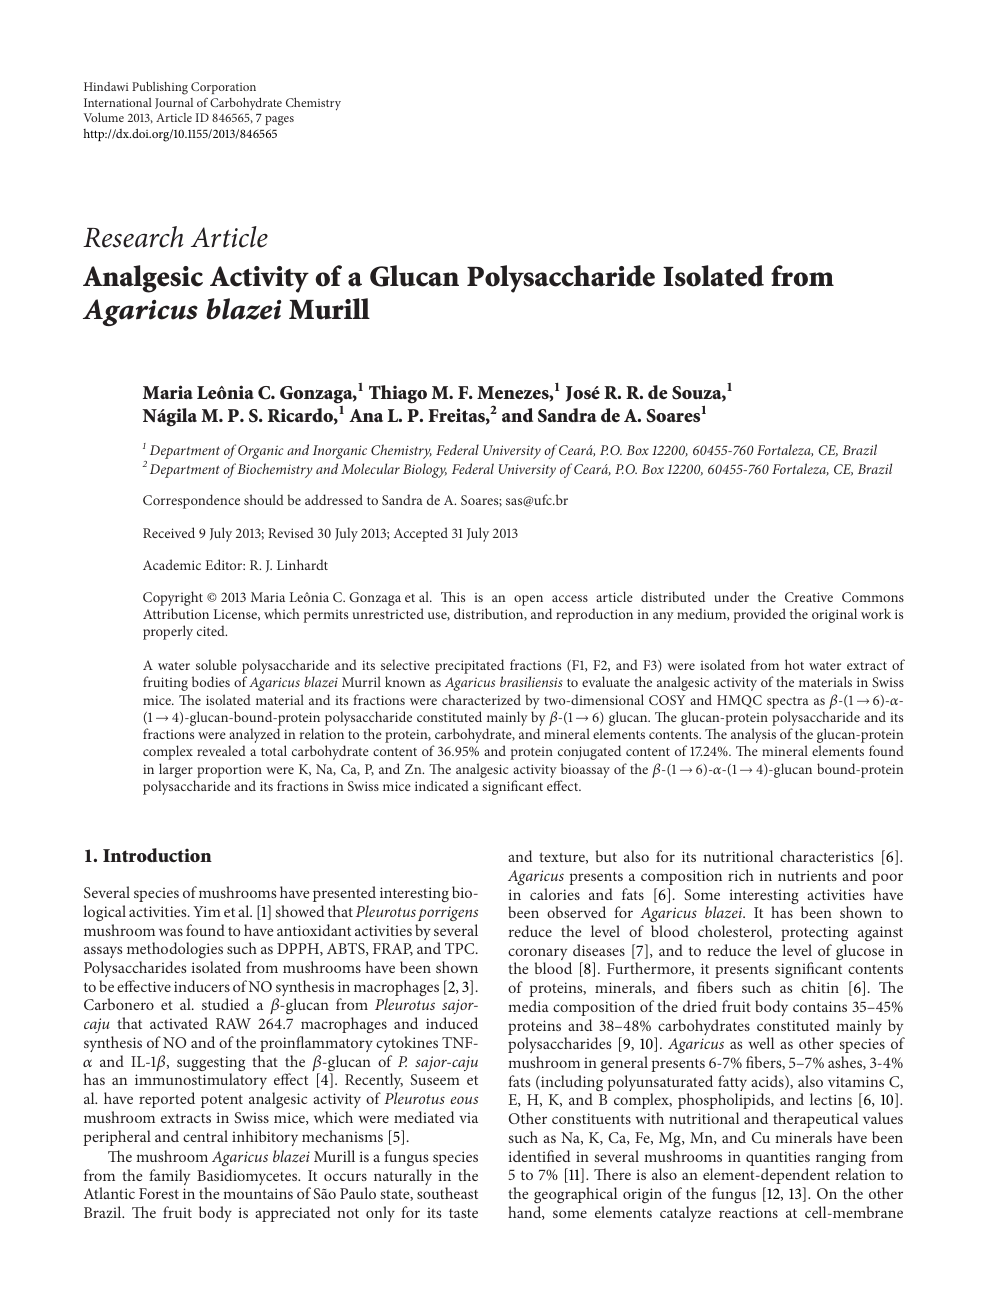 Analgesic Activity Of A Glucan Polysaccharide Isolated From Agaricus Blazei Murill Topic Of Research Paper In Chemical Sciences Download Scholarly Article Pdf And Read For Free On Cyberleninka Open Science Hub